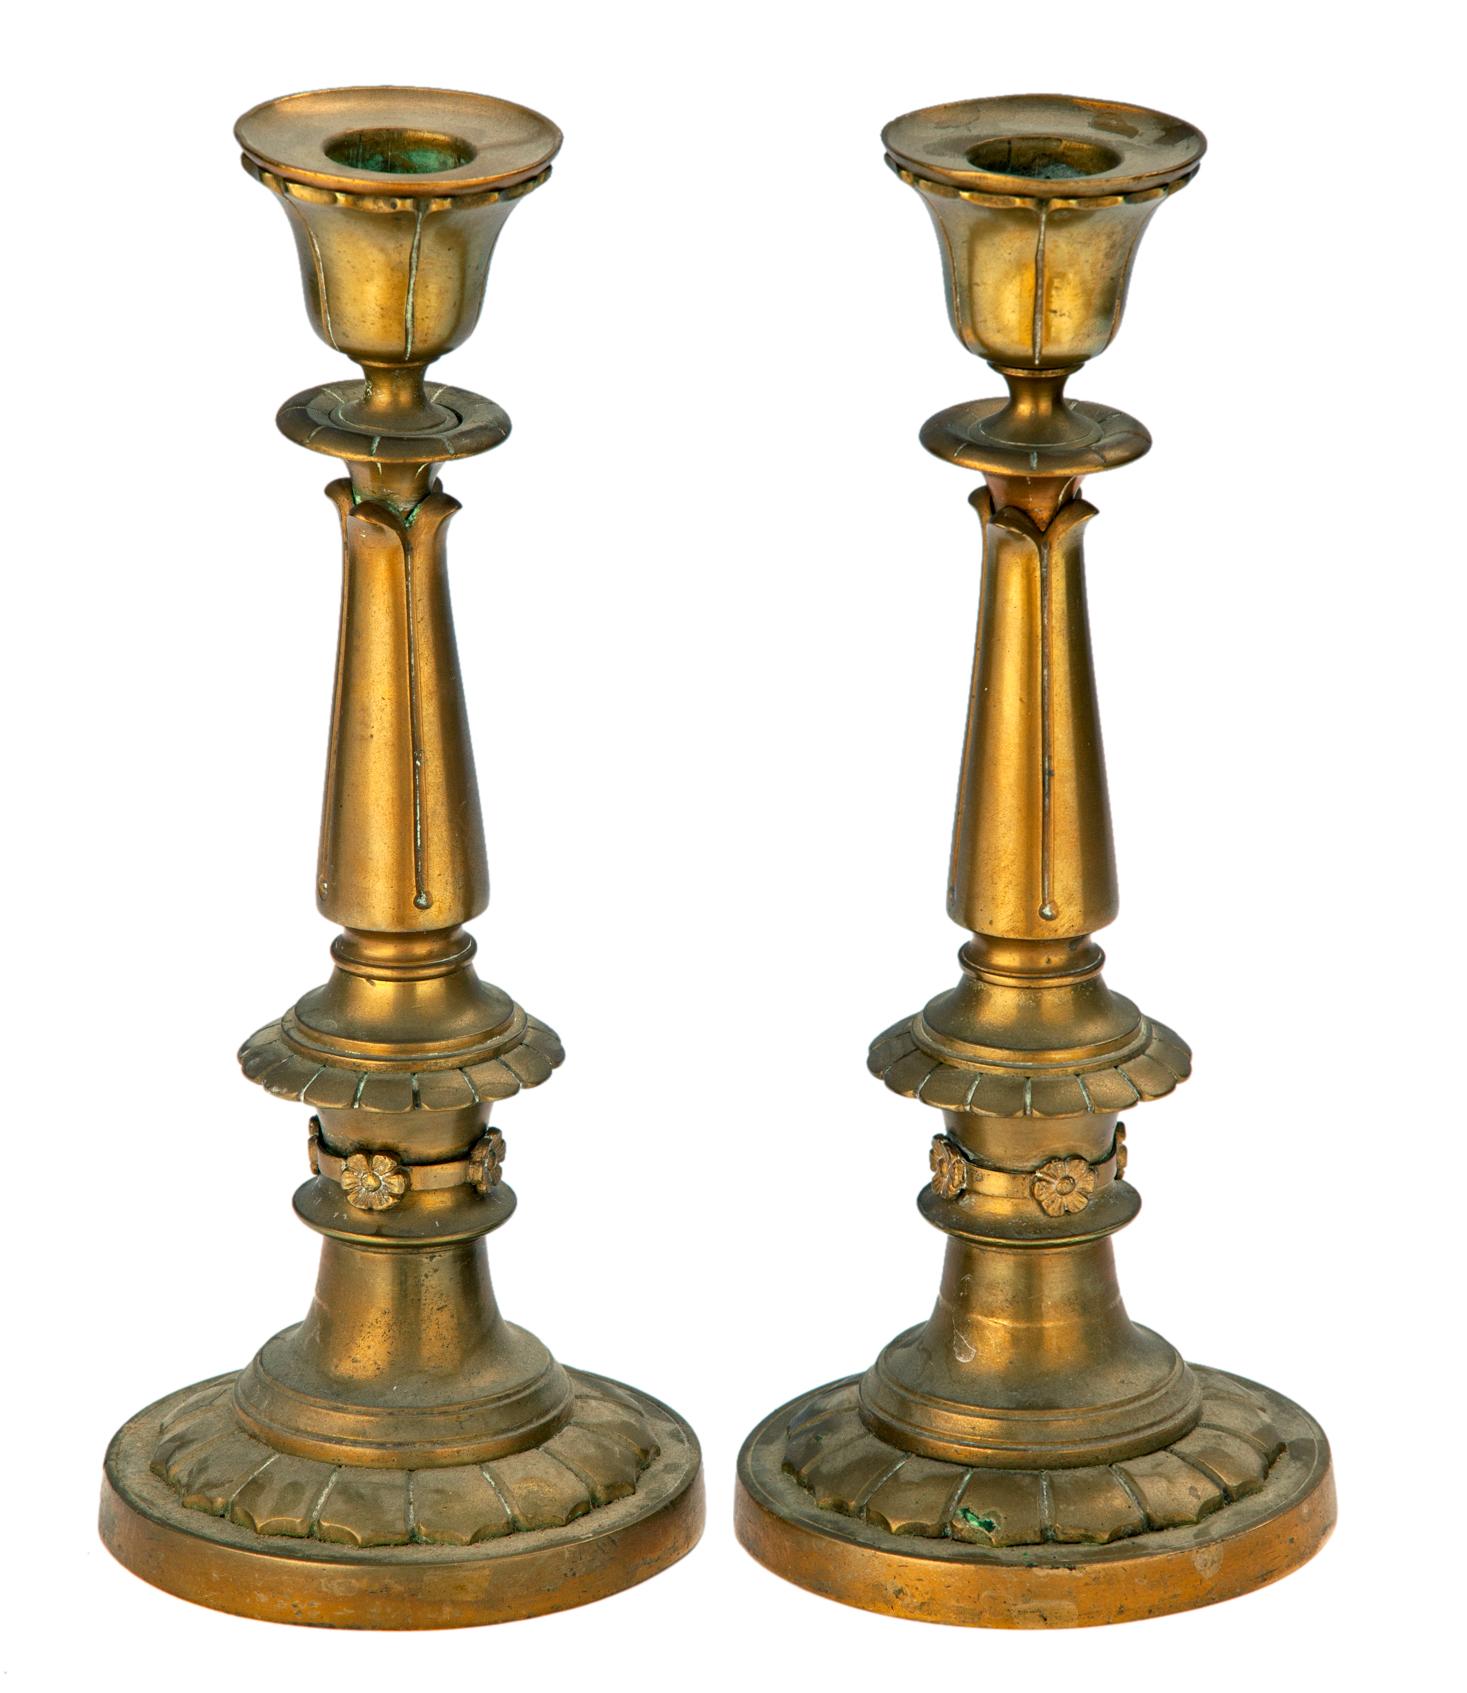 This pair of beautiful brass candlesticks have classical simplicity.
Exquisitely crafted in the distinct style of the 1st empire period in France. 
Quite heavy with a smooth patina, 
Adorned with decorative motifs & banded with small, linked flowers.